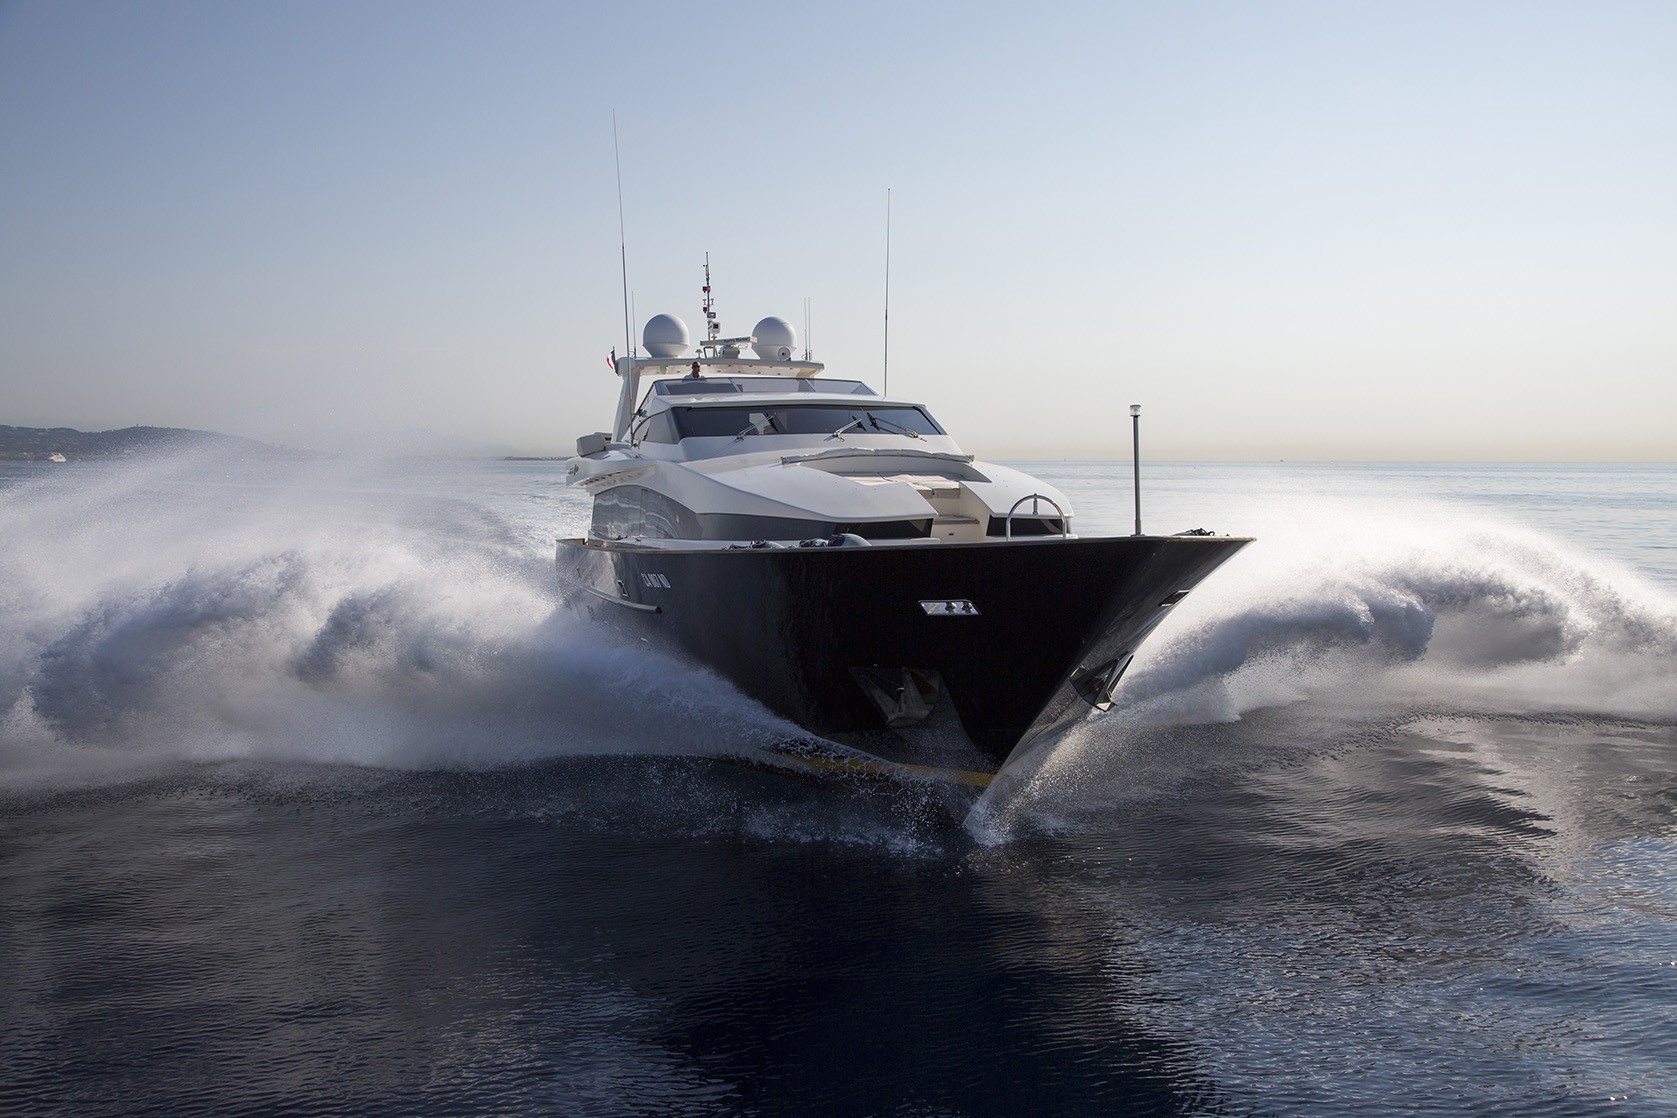 The 32m Yacht CAPPUCCINO